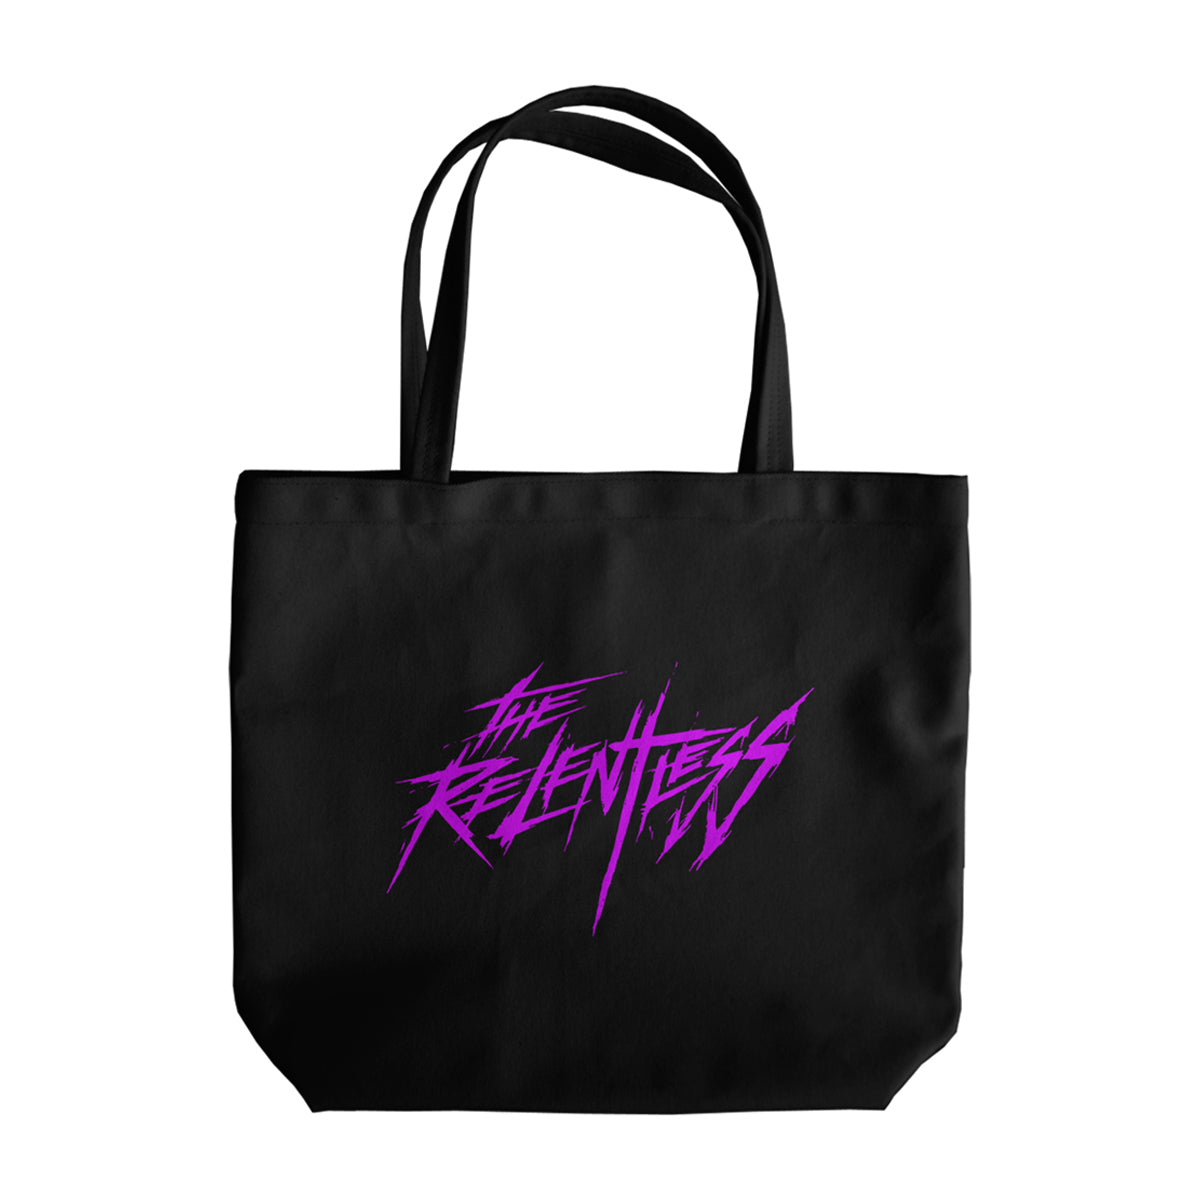 The Relentless Beach Tote